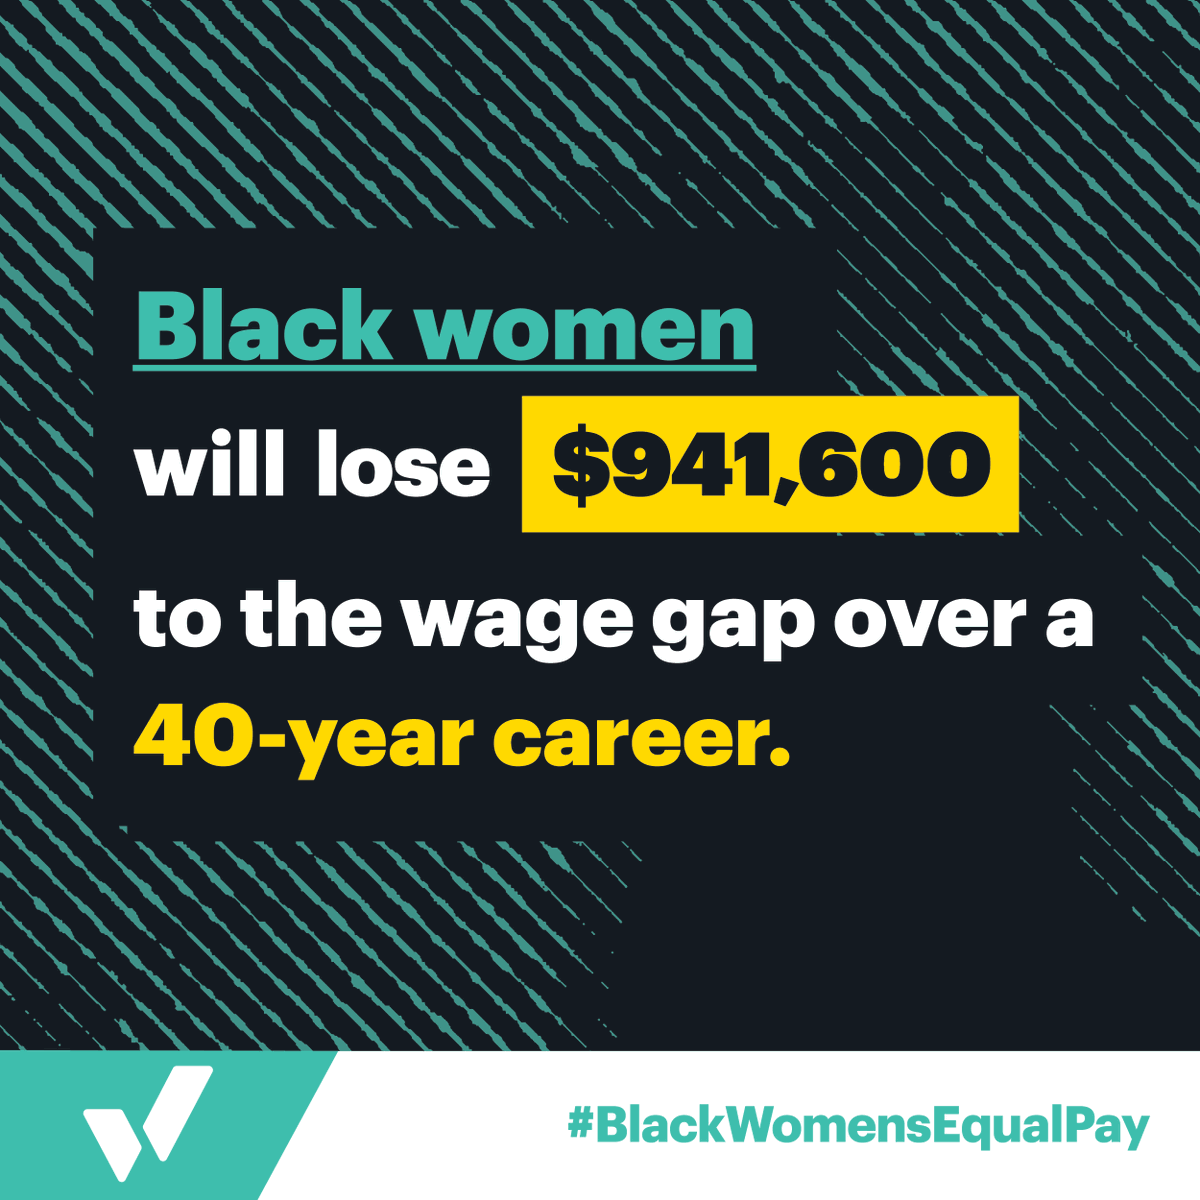 Today is #BlackWomensEqualPay Day, when Black women’s pay catches up to what white men were paid in 2019. That's nearly 8 extra months of work. Today we’re raising the call to end the wage gap – because Black women need and deserve better.